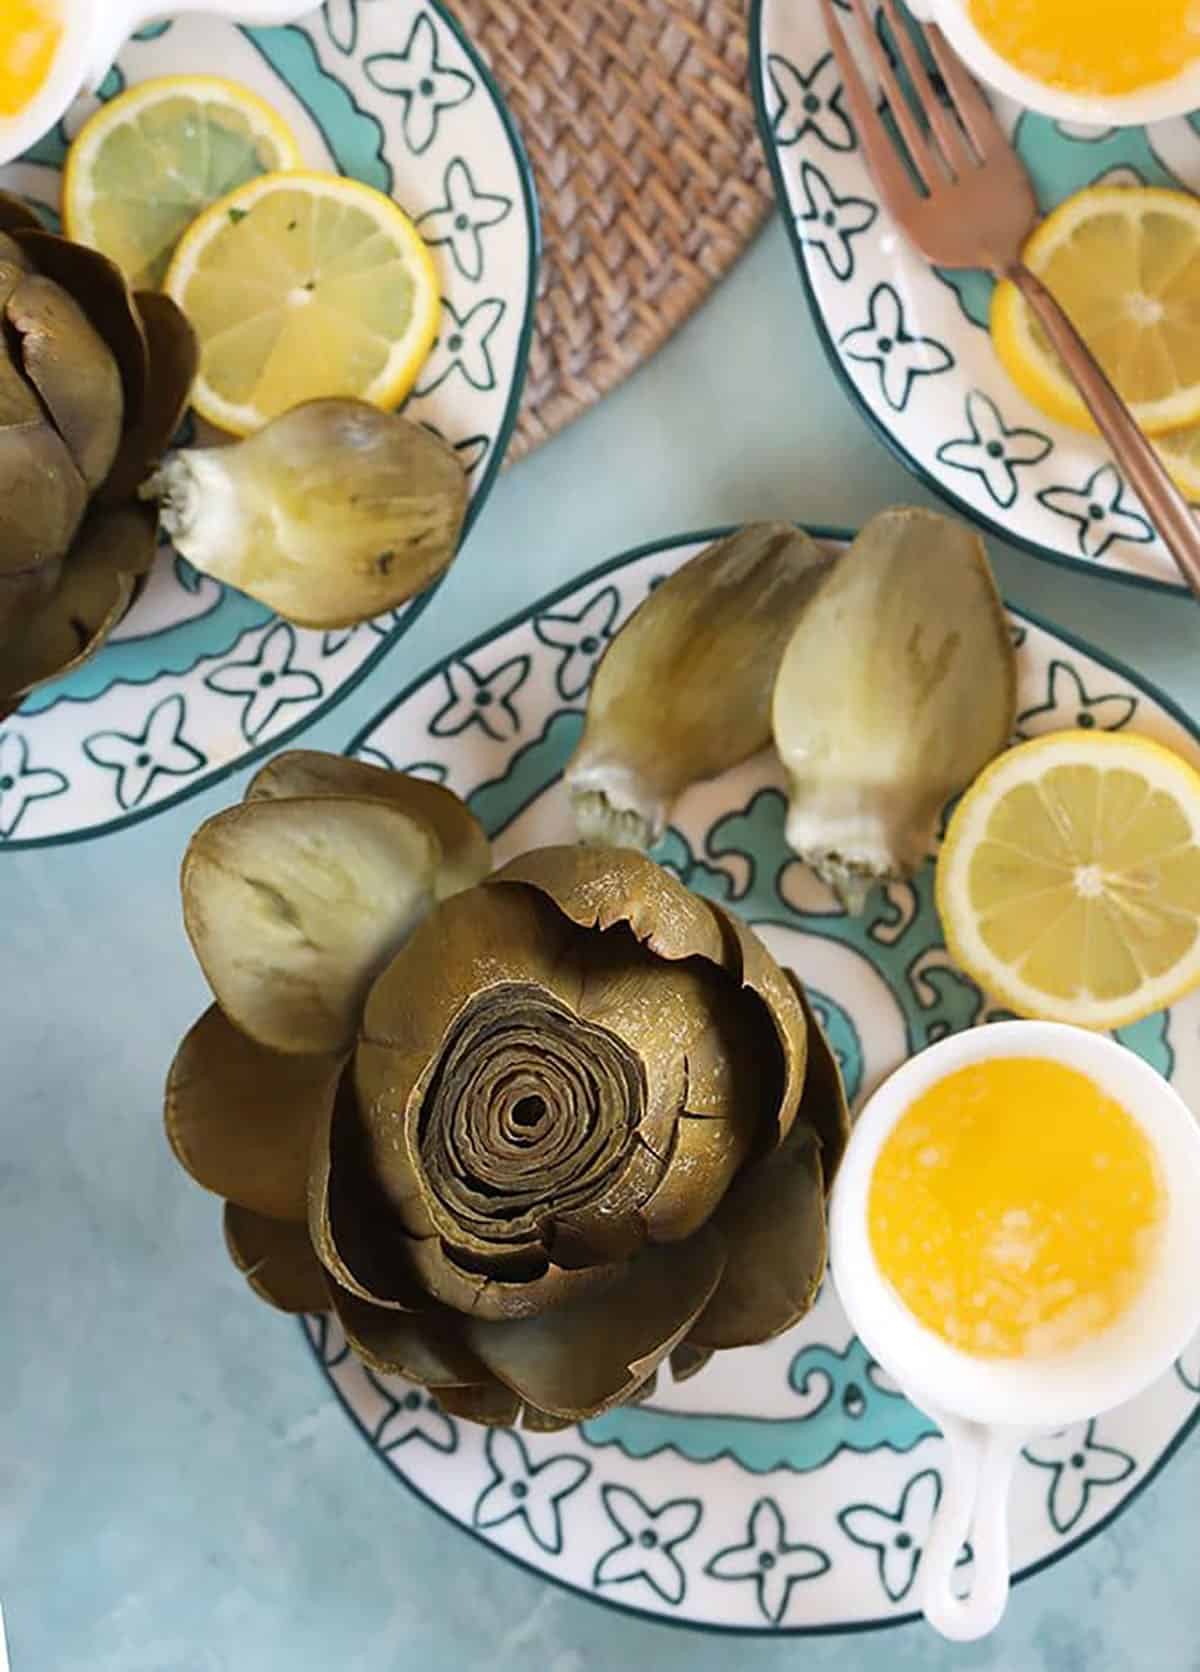 Instant Pot Artichokes with butter in a white dish.